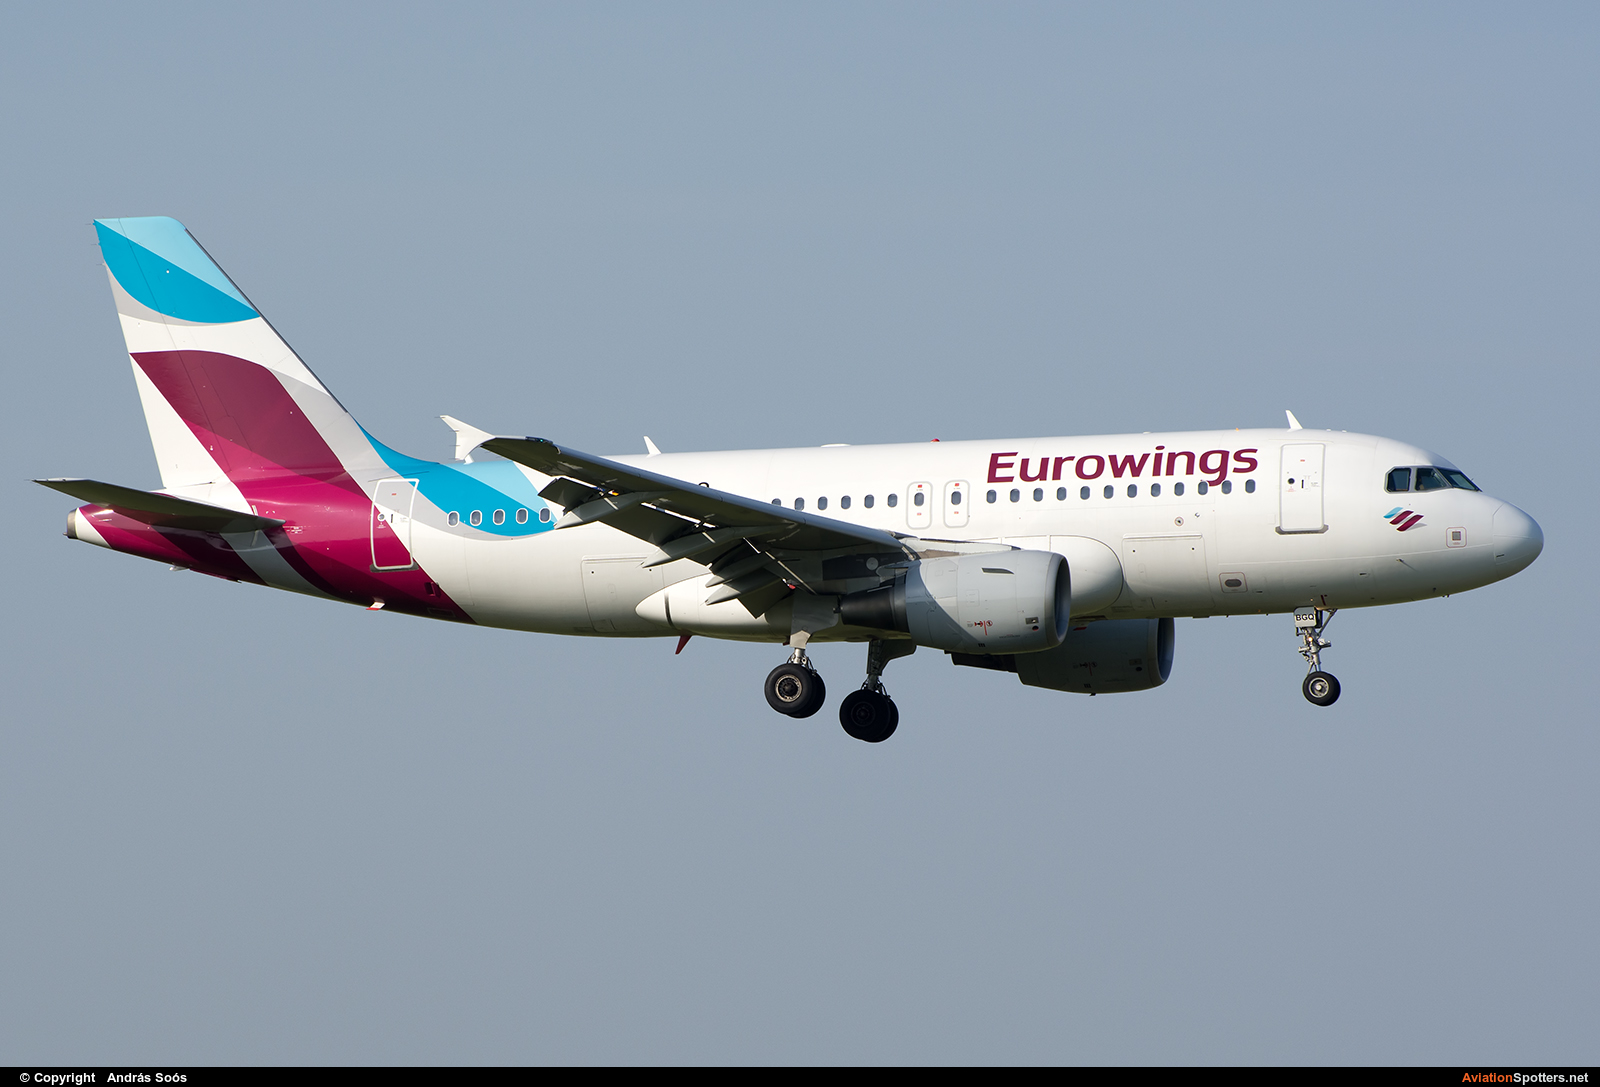 Eurowings  -  A319  (D-ABGQ) By András Soós (sas1965)